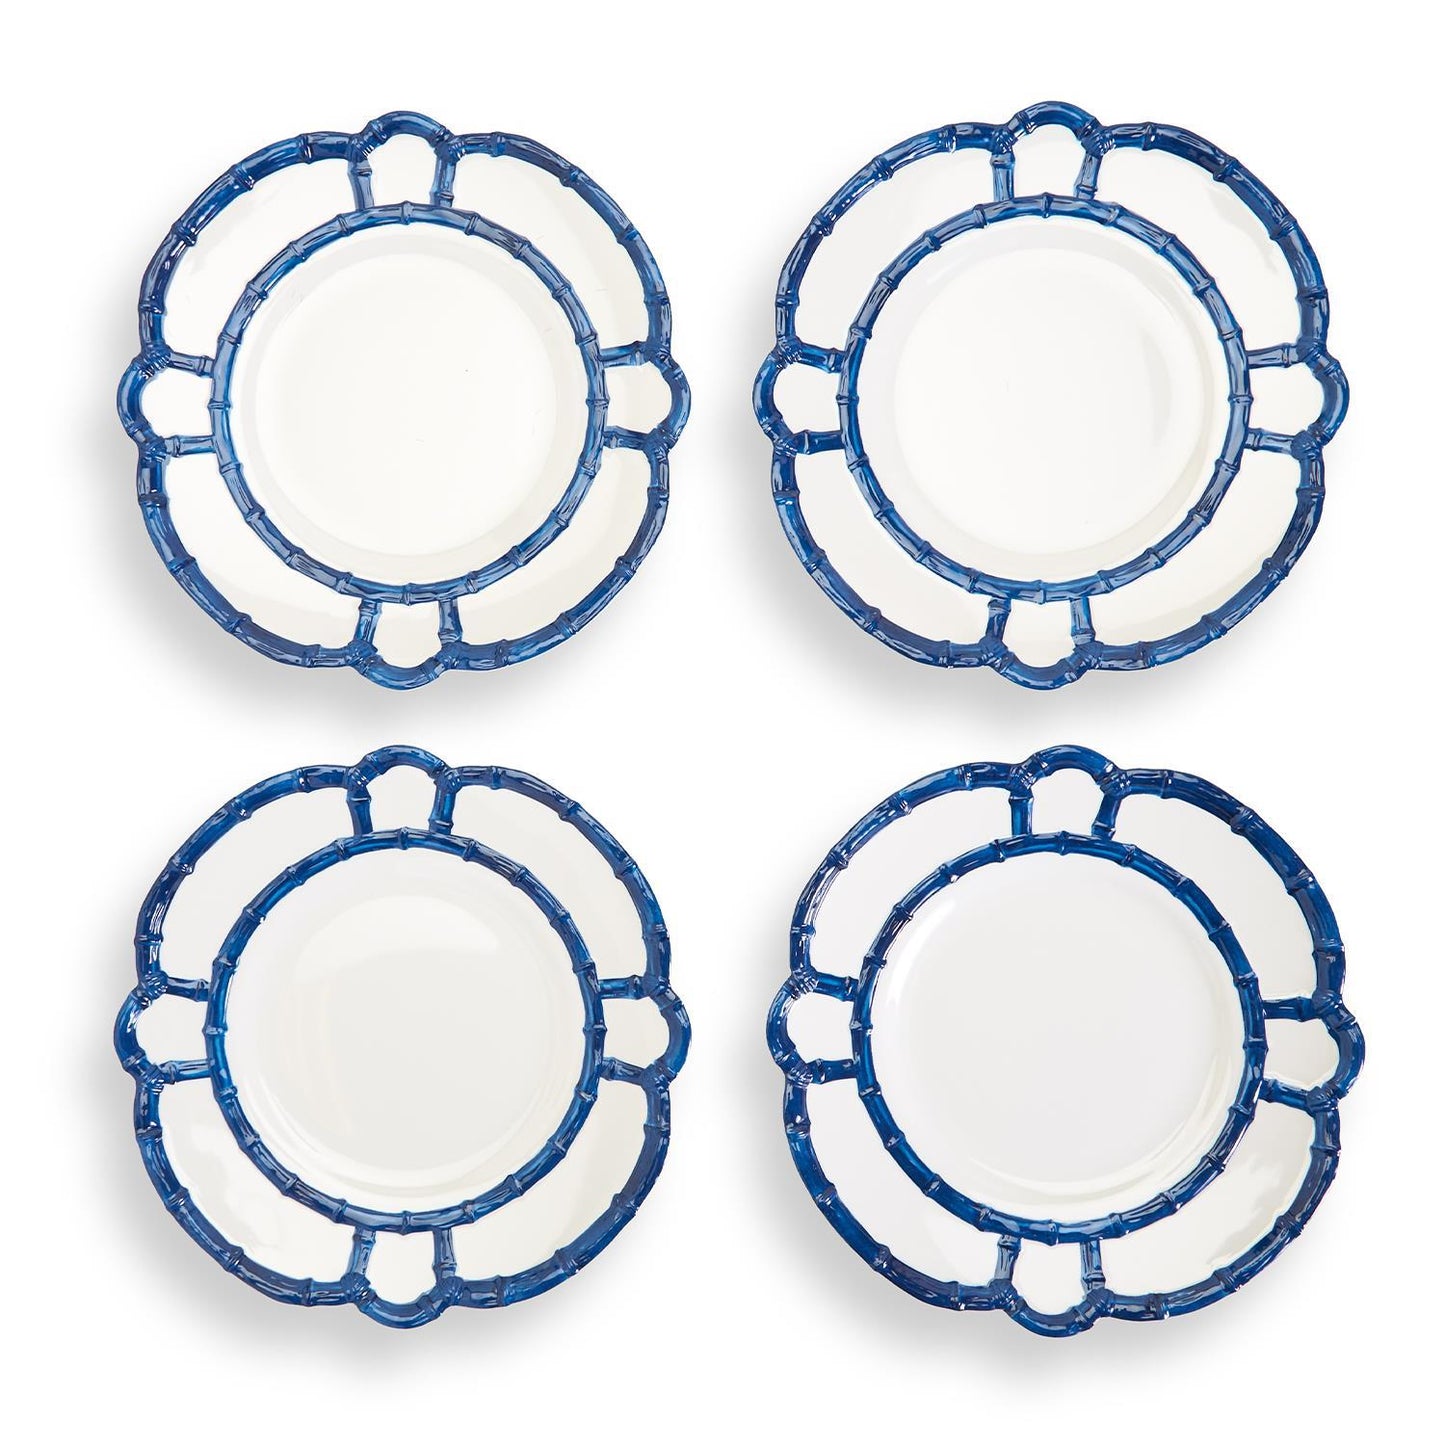 Two's Company Set of 4 Blue Bamboo Touch Dinner Plate